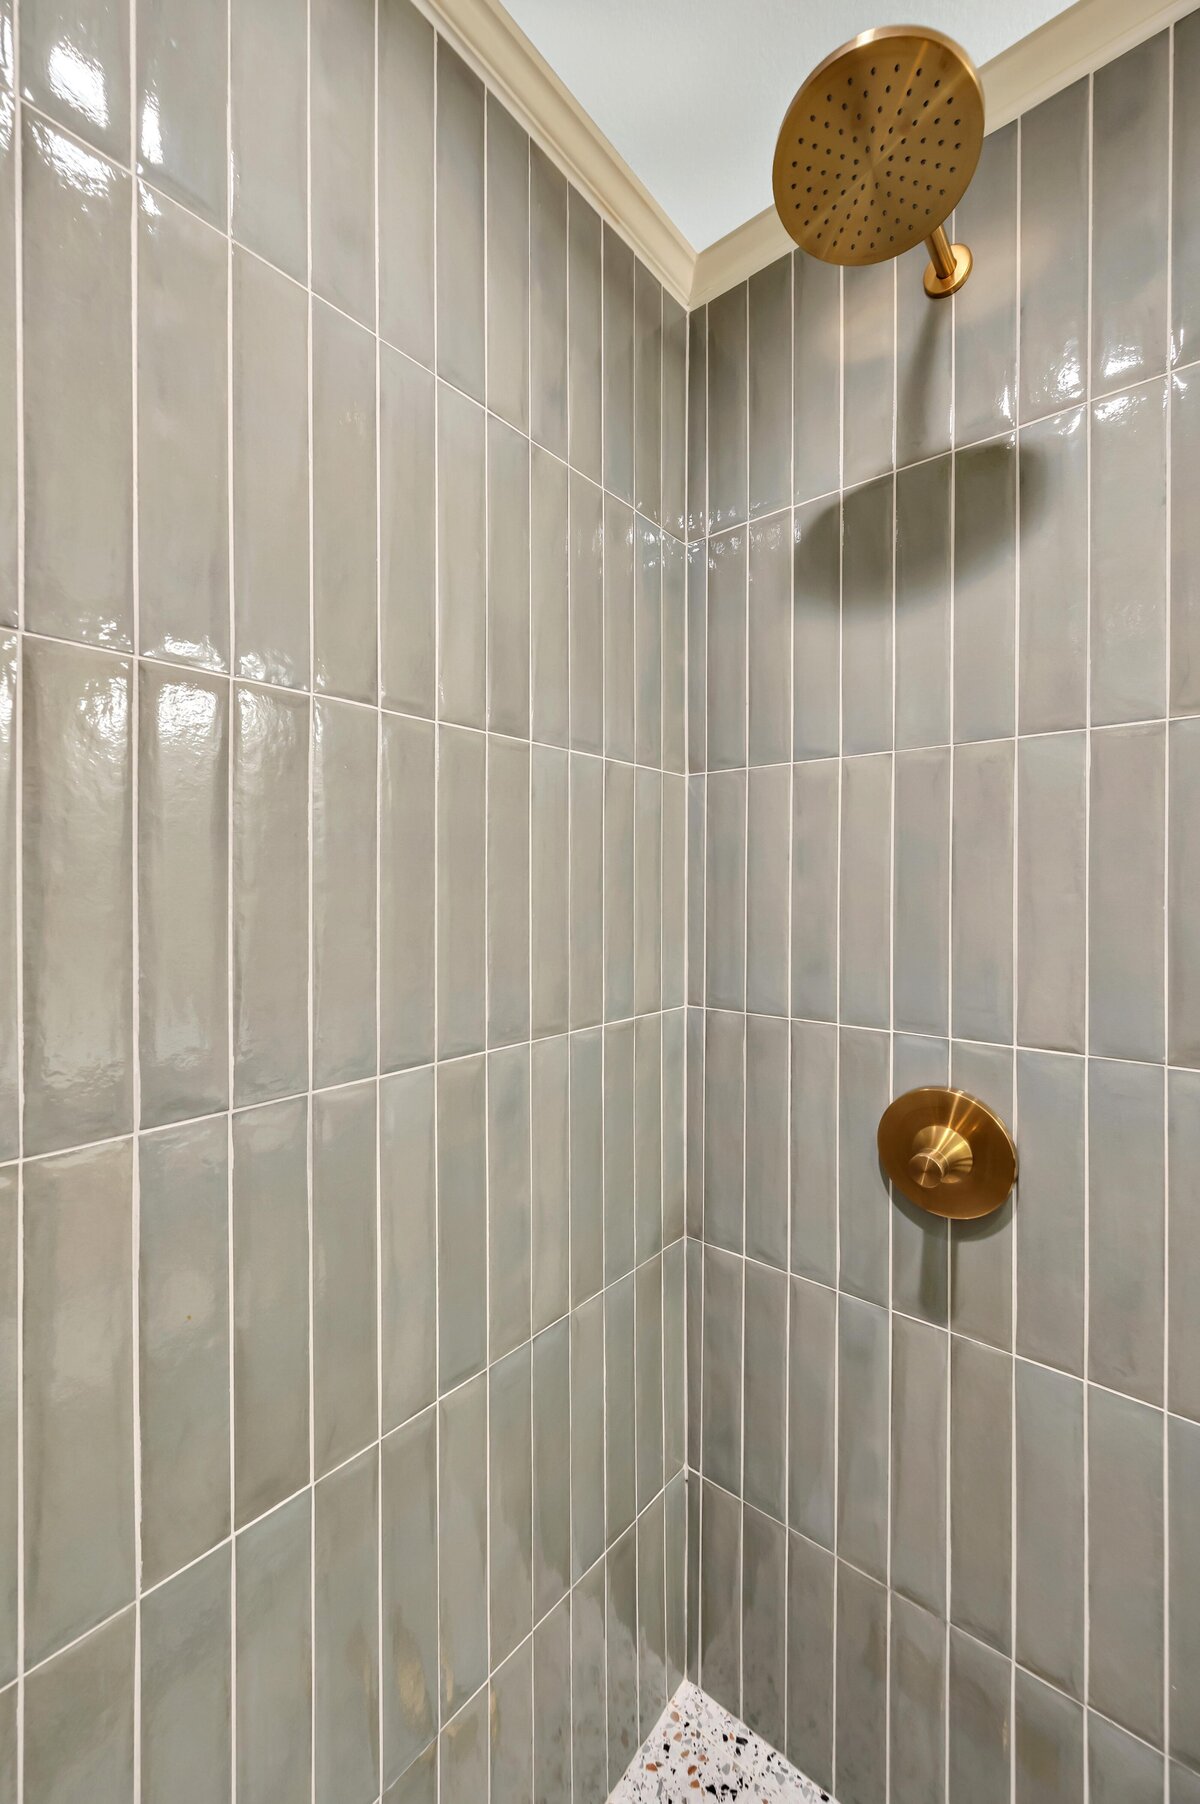 Beautiful tiled shower in the bathroom of this three-bedroom, three-bathroom vacation rental home with free wifi, outdoor theater, hot tub, propane grill and private yard in Waco, TX.